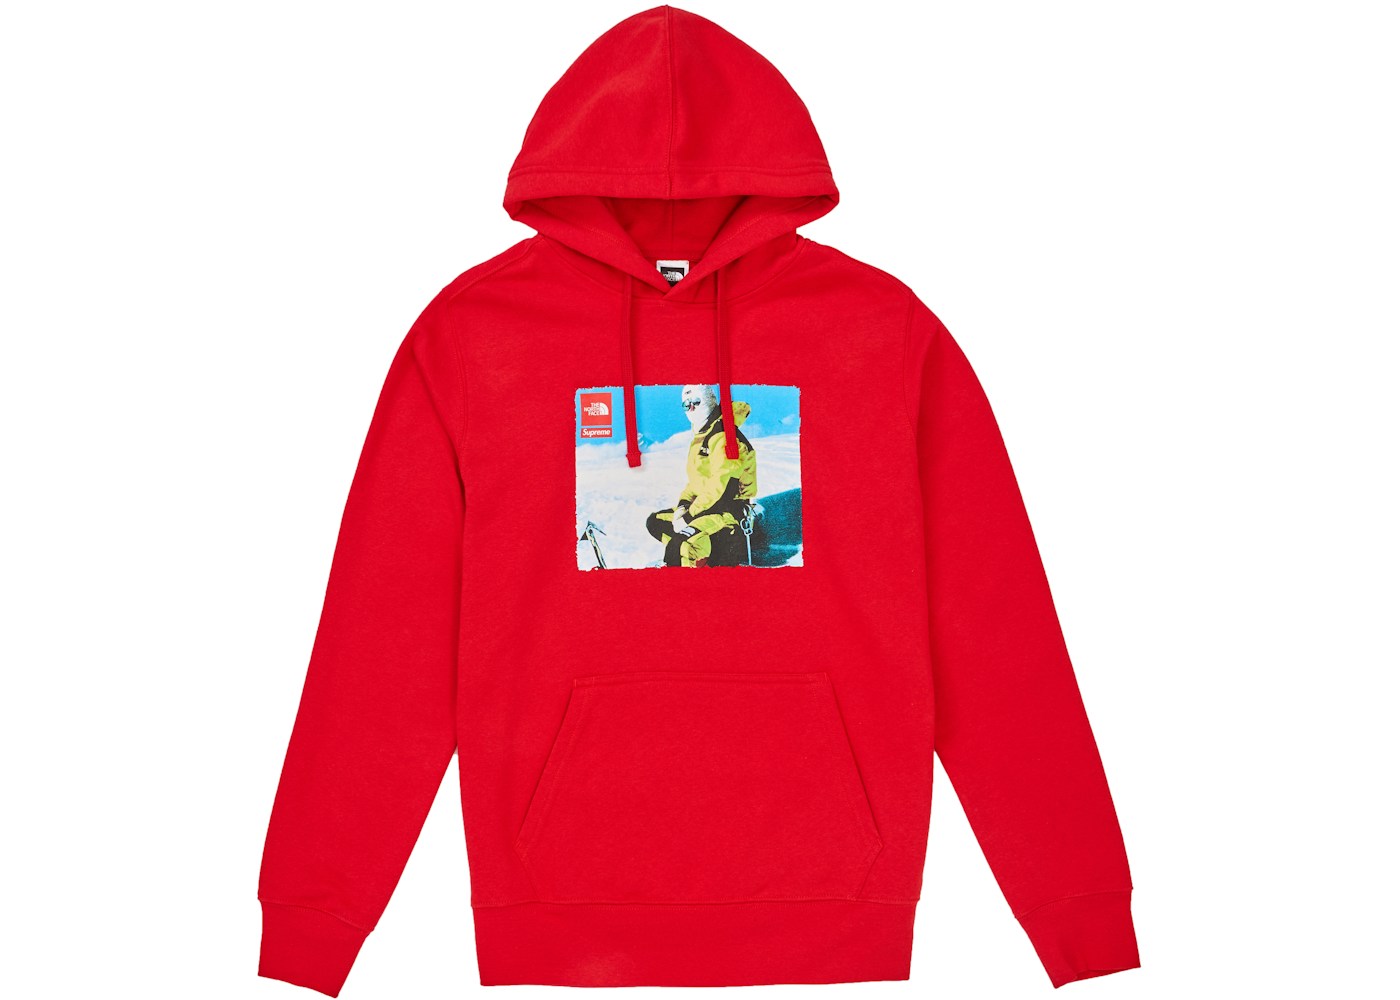 North Face Photo Hooded Sweatshirt Red